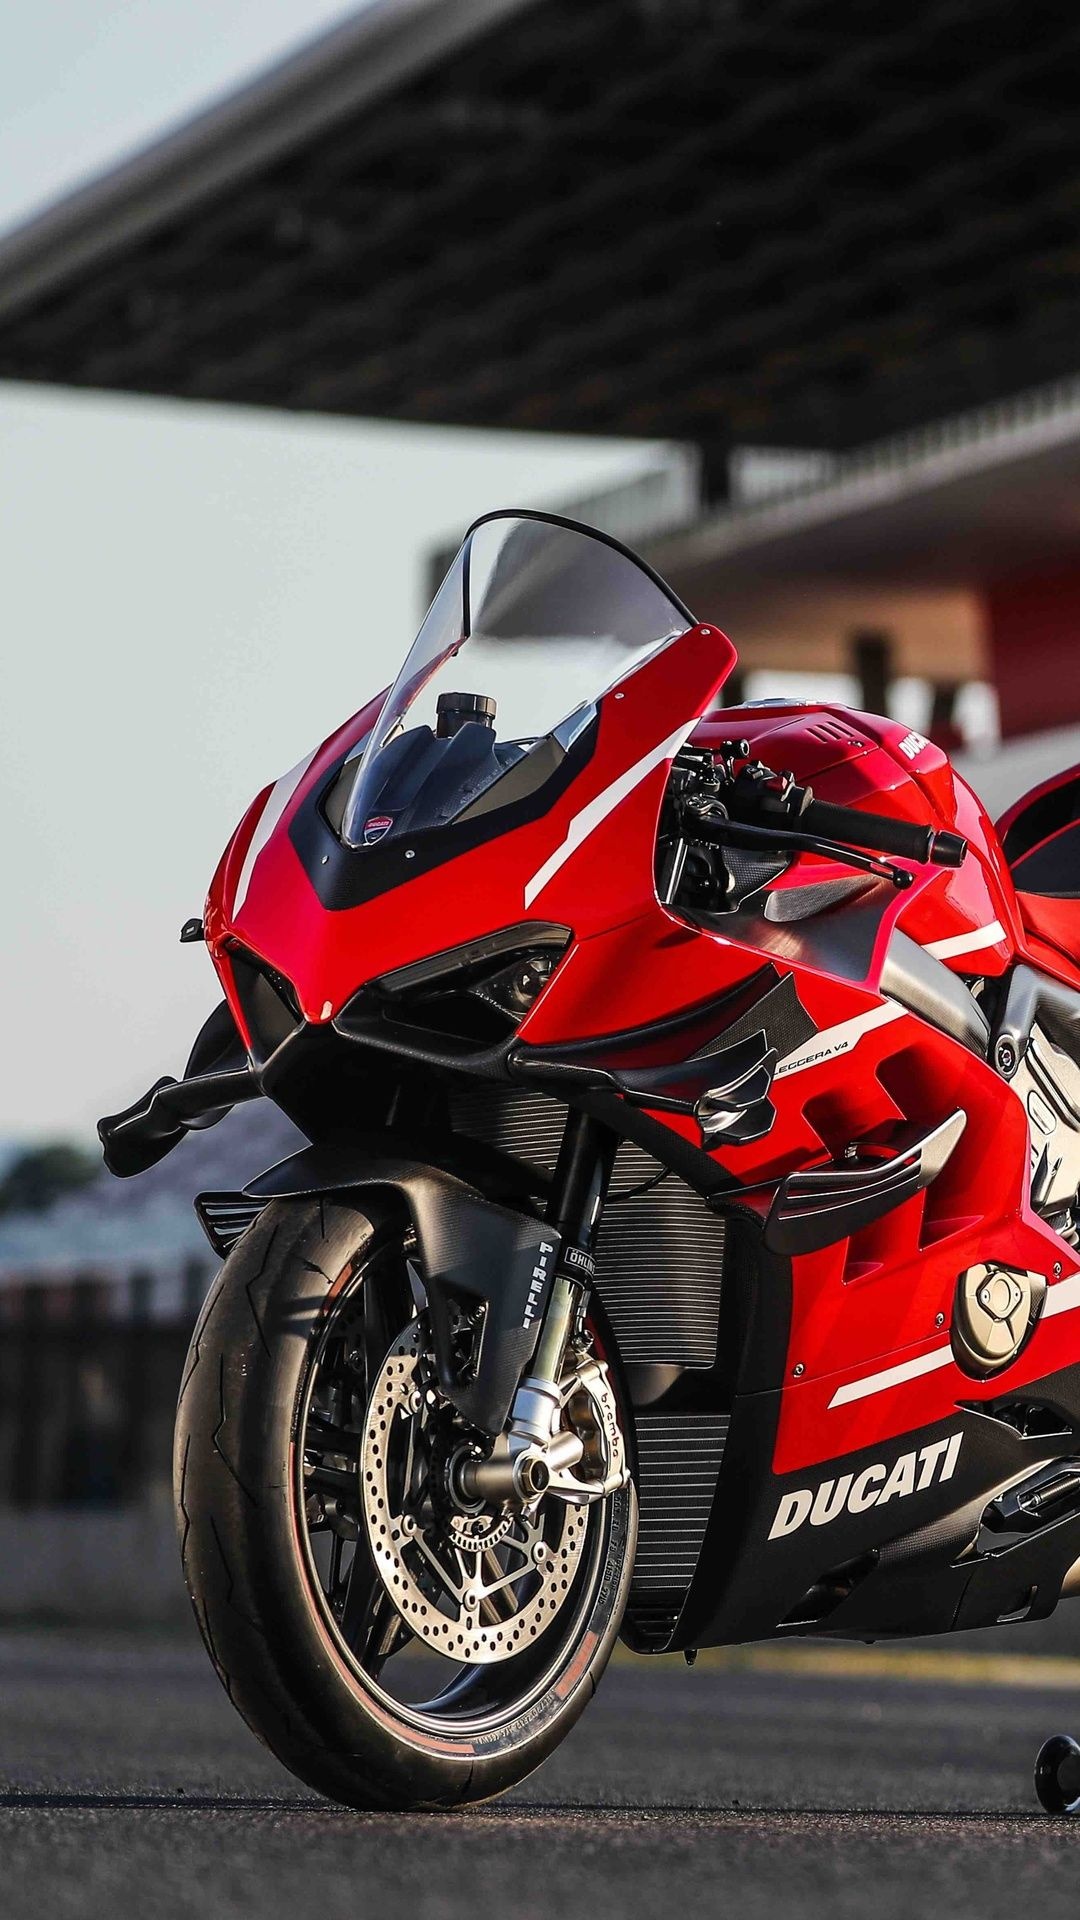 Superbike: A red racing motorcycle produced by Ducati, MotoGP, WSBK, Ducati Corse. 1080x1920 Full HD Background.